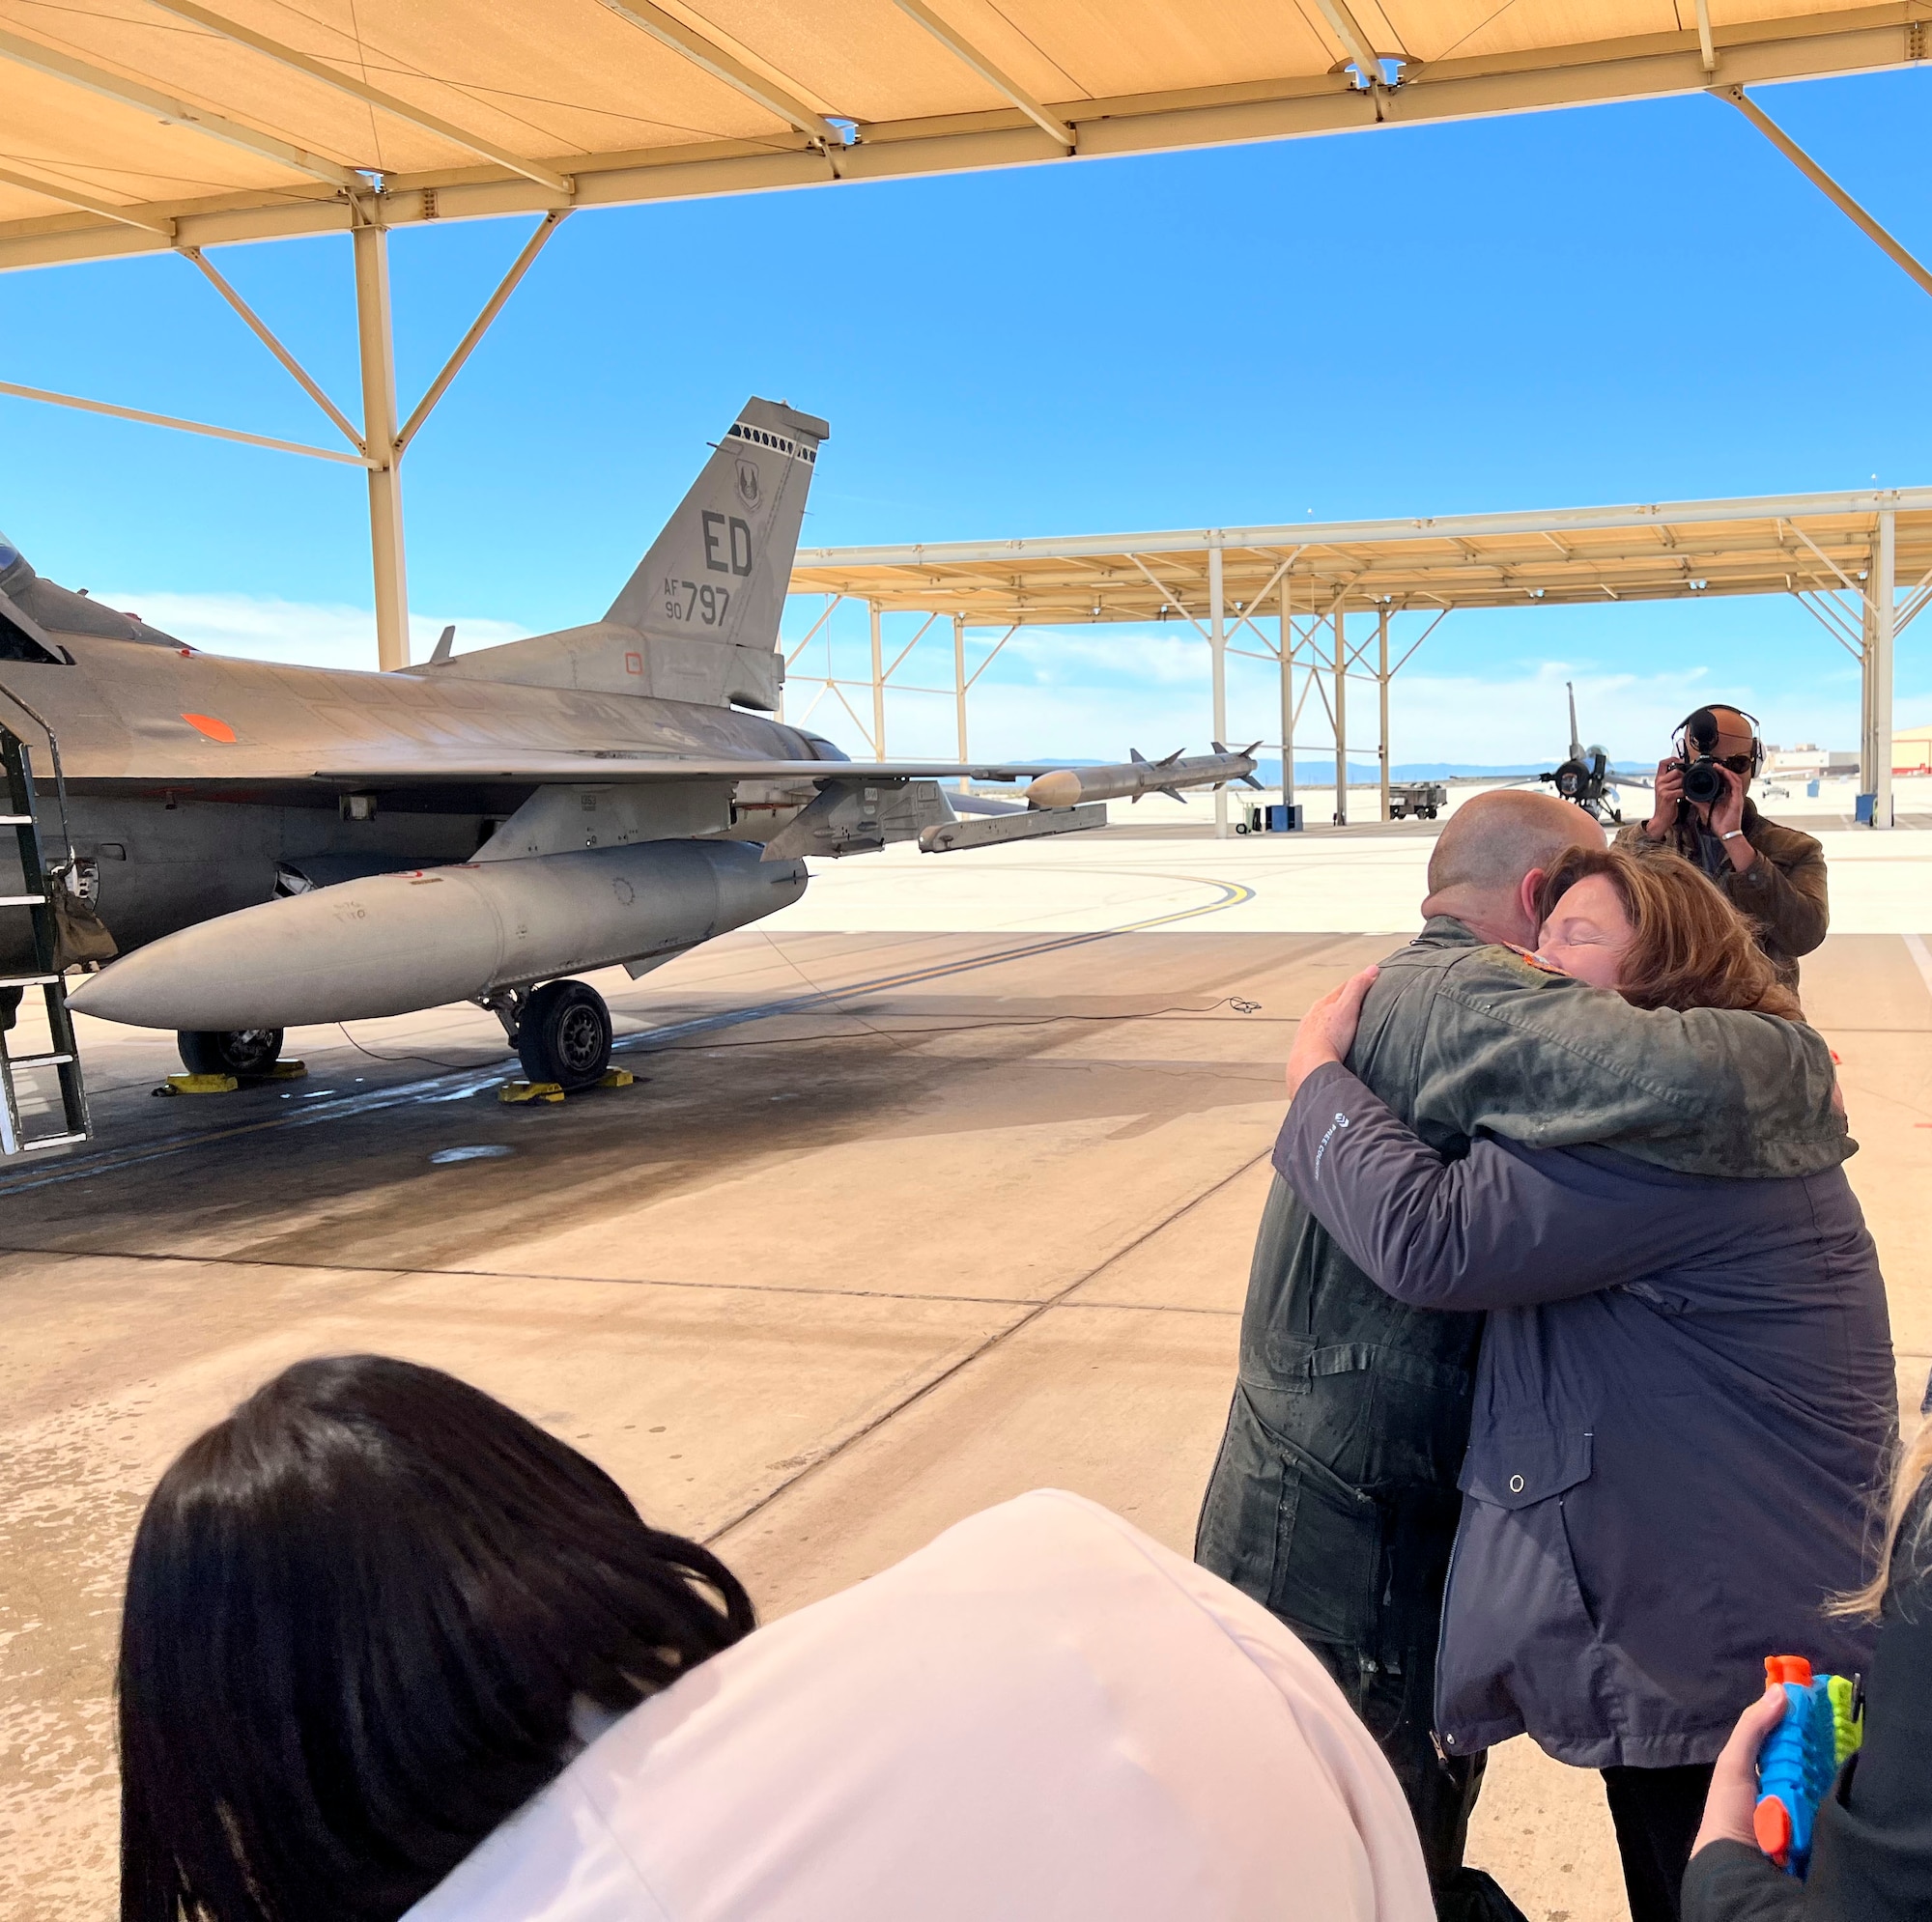 Lt. Col. Matthew Taranto, Chief Aerospace Physiologist, U.S. Air Force Test Pilot School greets his family after conducting his "fini-flight" before retirement March 31st. (Photo courtesy of Staff Sgt. Elizabeth Taranto)